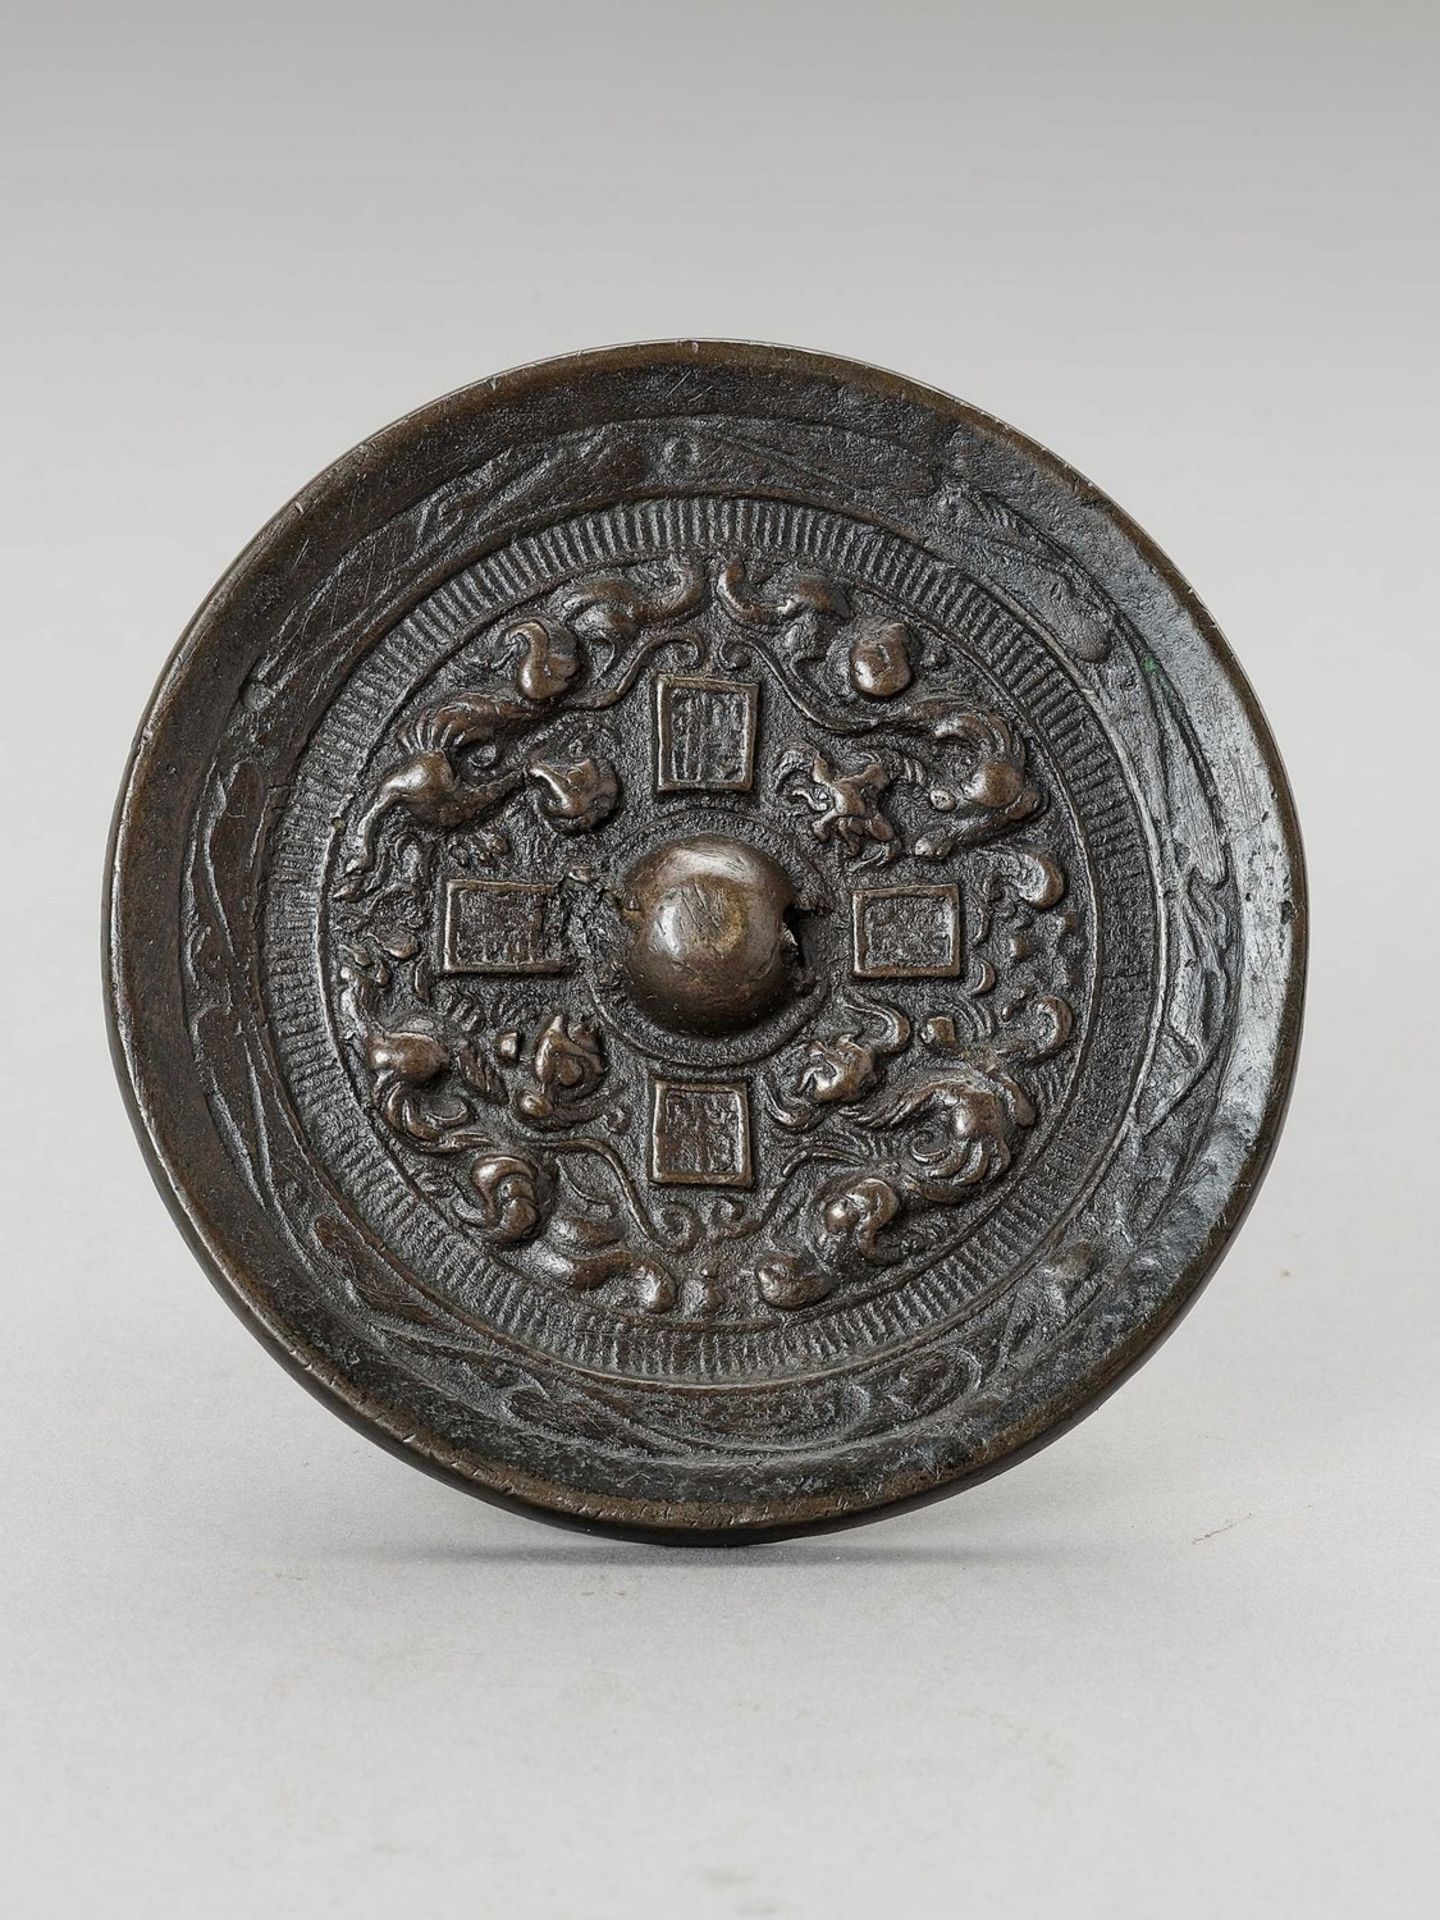 A CIRCULAR BRONZE MIRROR WITH DRAGONS - Image 2 of 4